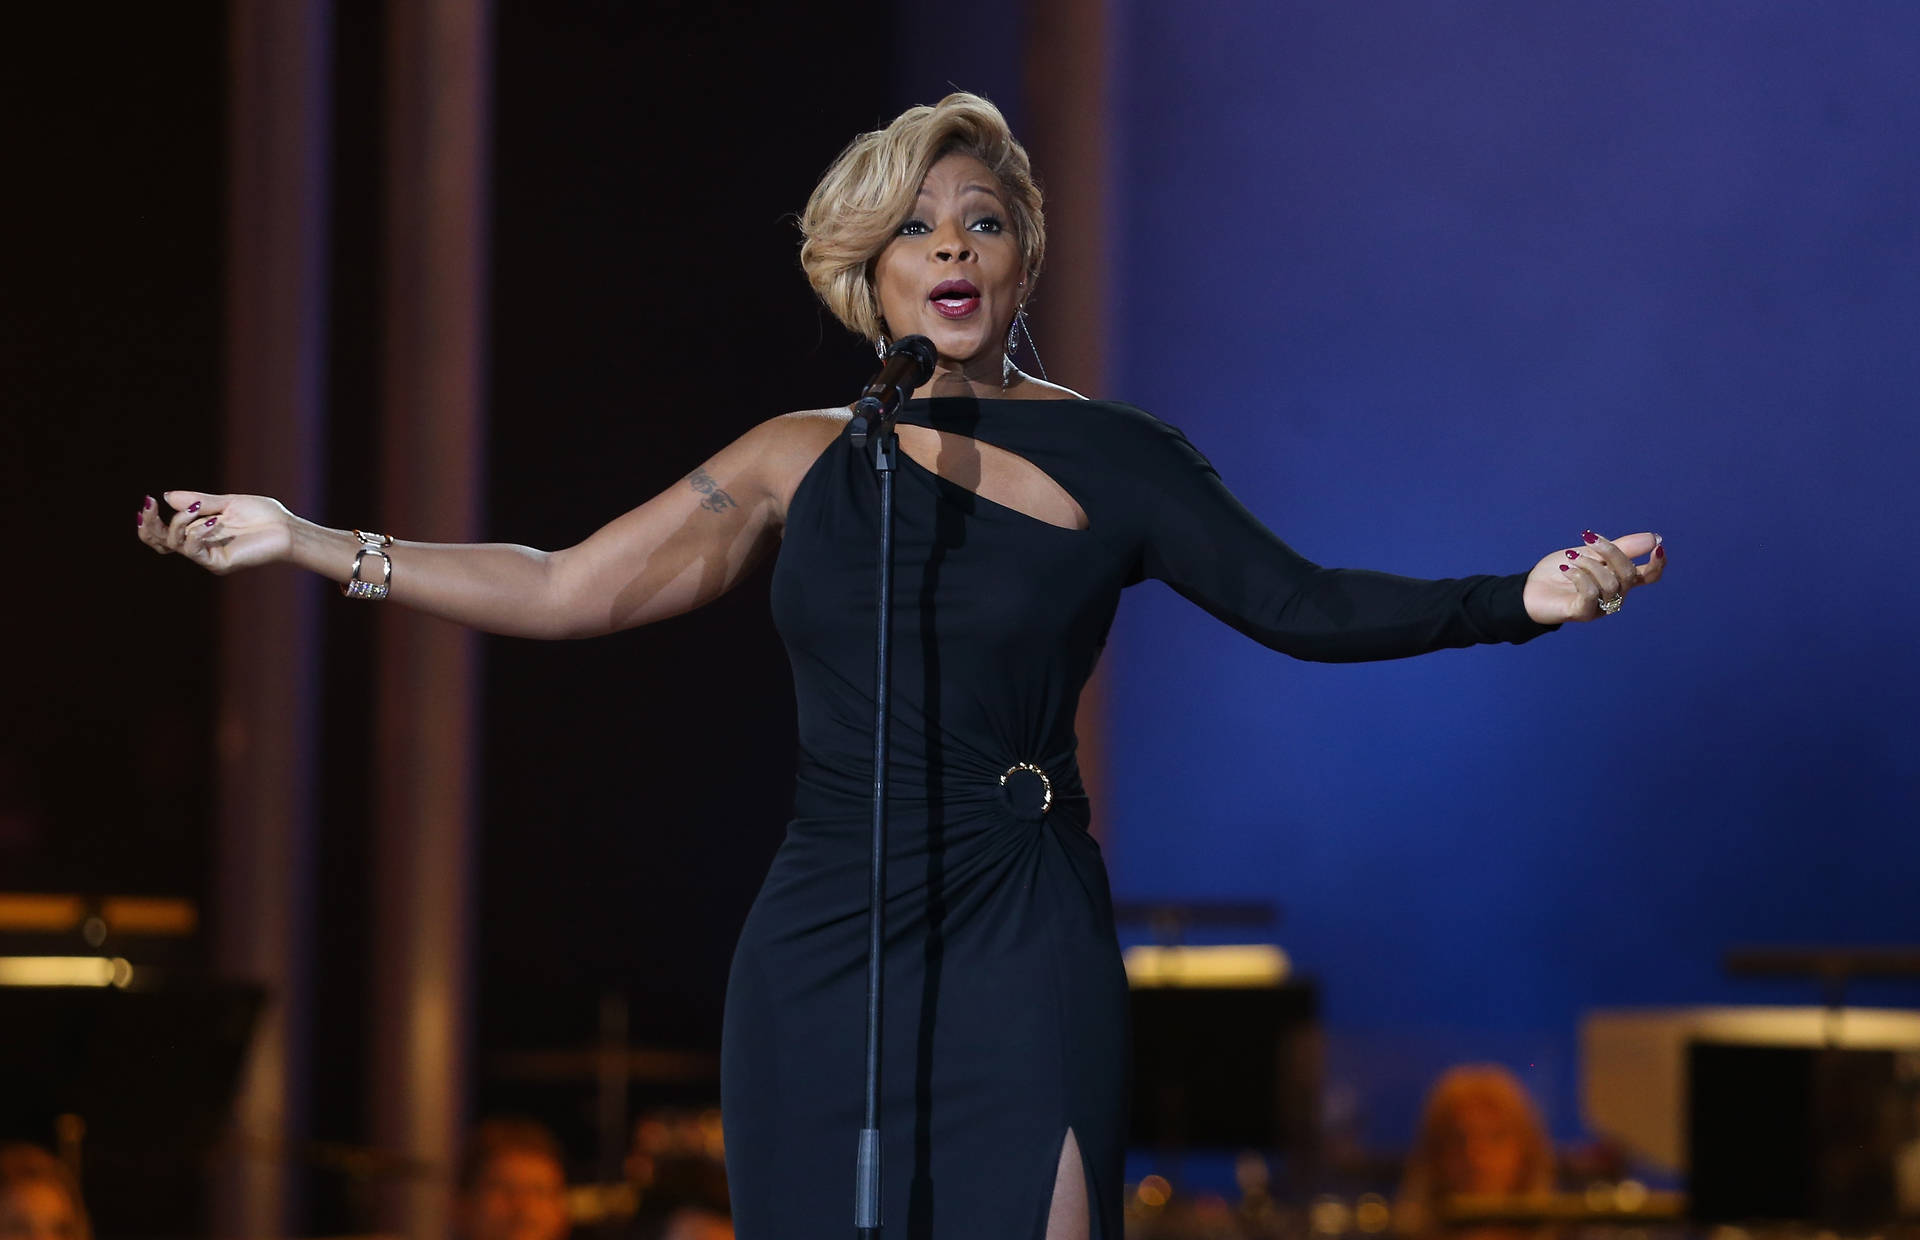 Hollywood Singer And Actress Mary J. Blige On Stage Background